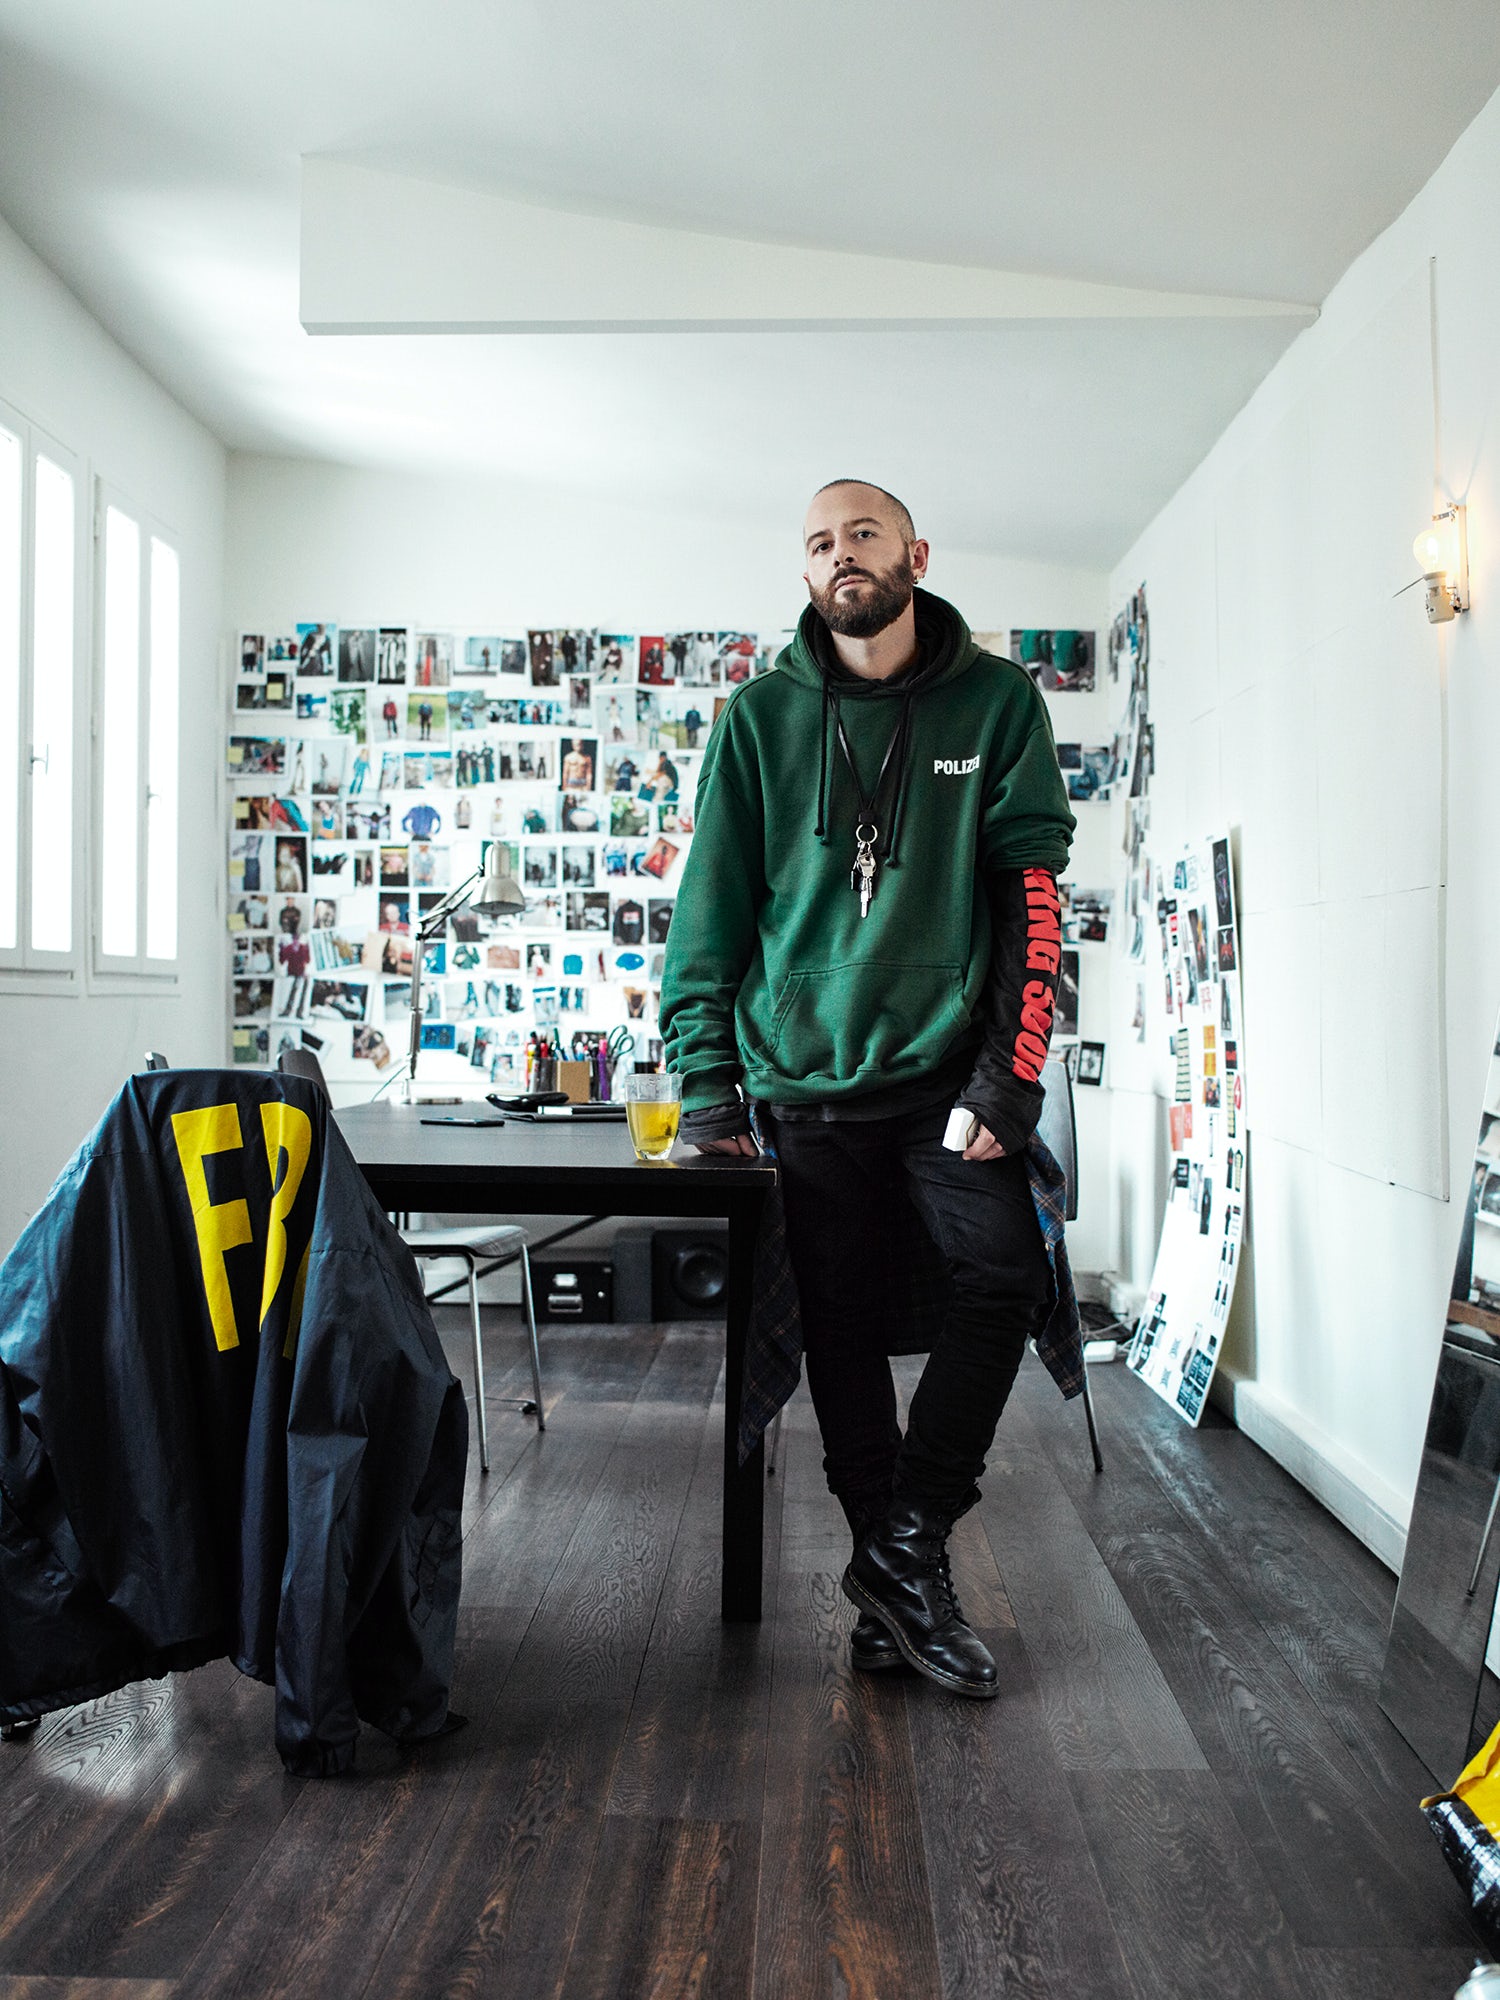 5 Things You Need To Know About Demna Gvasalia, Balenciaga's New Creative  Director